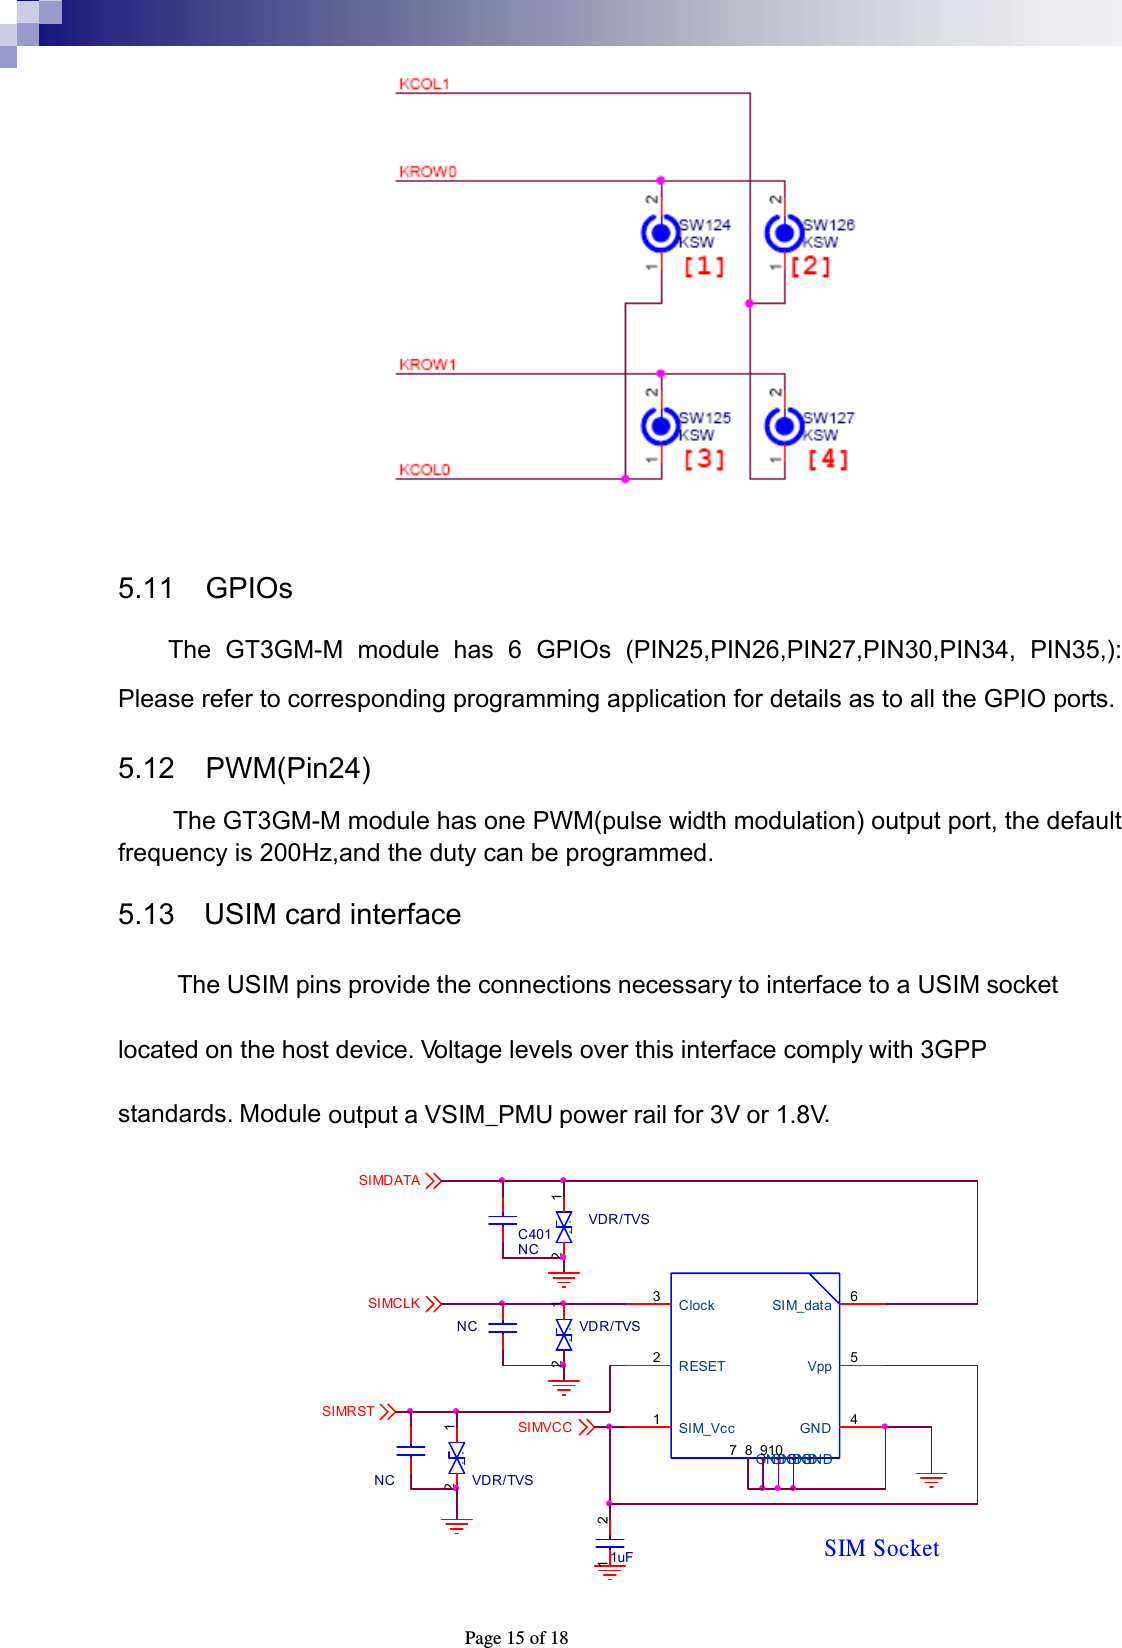  Page 15 of 18   5.11 GPIOs The GT3GM-M module has 6 GPIOs (PIN25,PIN26,PIN27,PIN30,PIN34, PIN35,): Please refer to corresponding programming application for details as to all the GPIO ports. 5.12  PWM(Pin24)  The GT3GM-M module has one PWM(pulse width modulation) output port, the default frequency is 200Hz,and the duty can be programmed. 5.13    USIM card interface The USIM pins provide the connections necessary to interface to a USIM socket   located on the host device. Voltage levels over this interface comply with 3GPP standards. Module output a VSIM_PMU power rail for 3V or 1.8V. VDR/TVS.1.2SIM SocketSIM_Vcc1RESET2Clock3SIM_data 6Vpp 5GND 4GND7GND8GND9GND101uF1 2SIMRST SIMDATA SIMVCC SIMCLK C401NCNCNCVDR/TVS.1.2VDR/TVS.1.2 